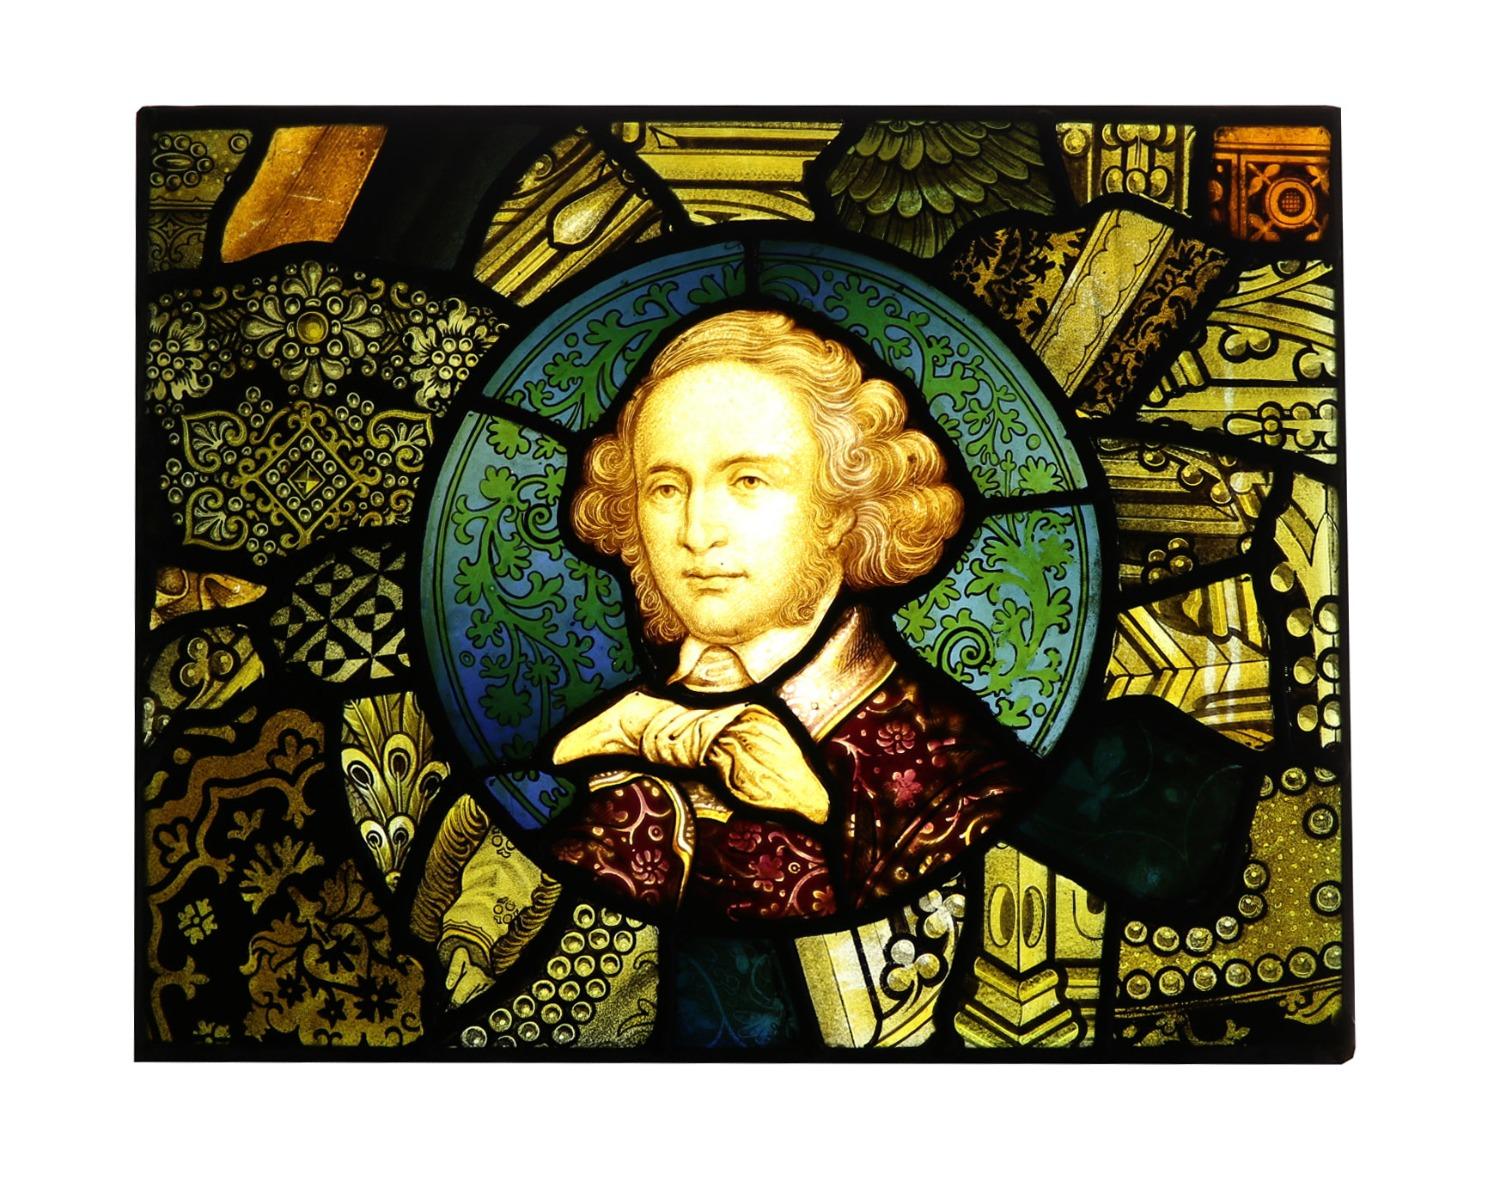 An antique stained glass window panel depicting the composer Felix Mendelssohn.